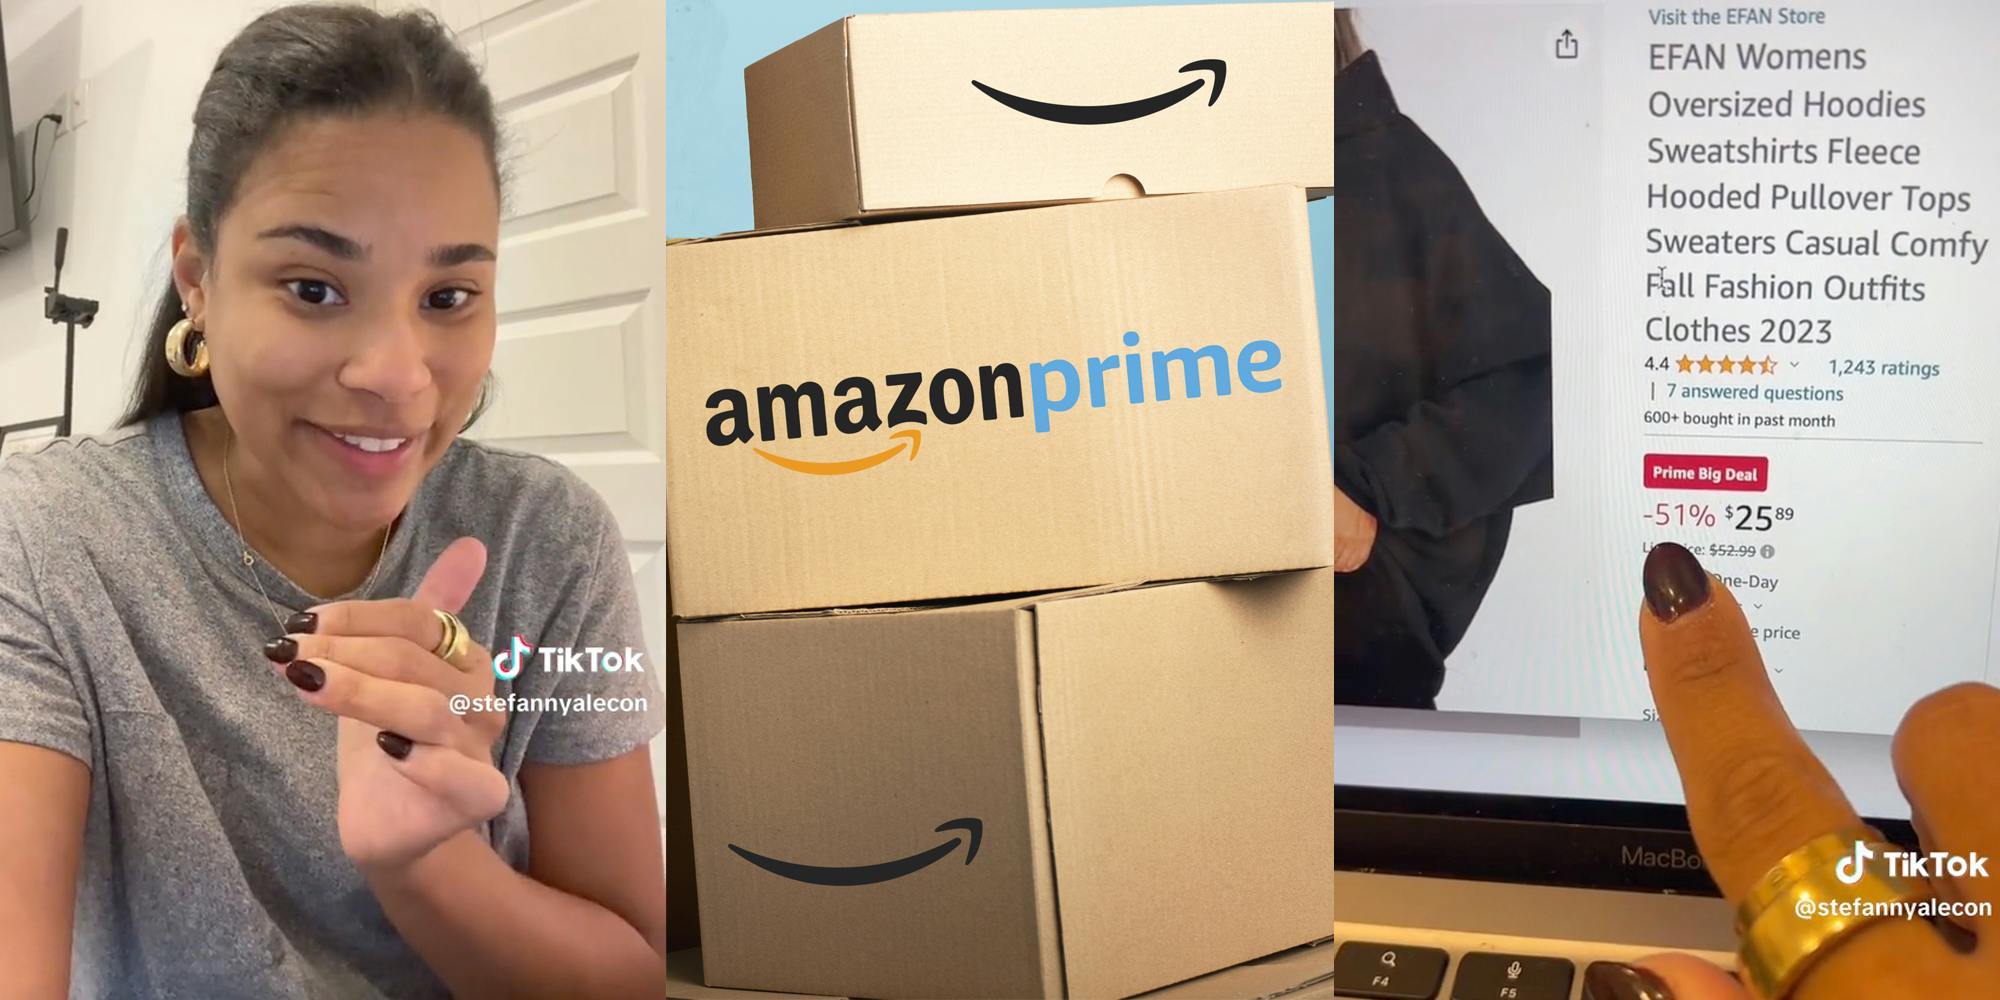 Woman speaking to camera(l), Stack of Amazon Prime boxes(c), Hand pointing to Amazon prime website prices(r)